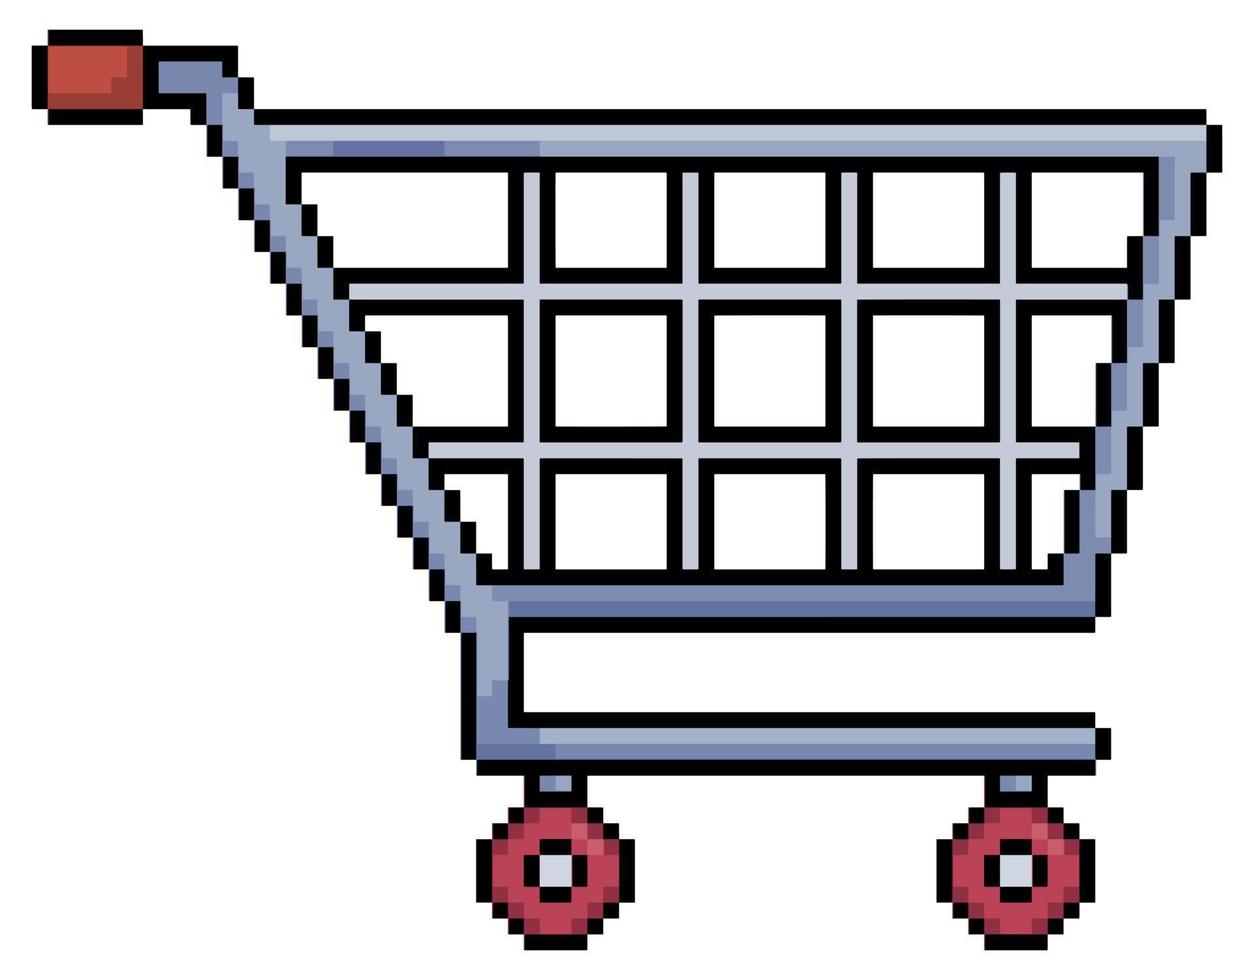 Pixel art shopping cart, supermarket trolley vector icon for 8bit game on white background